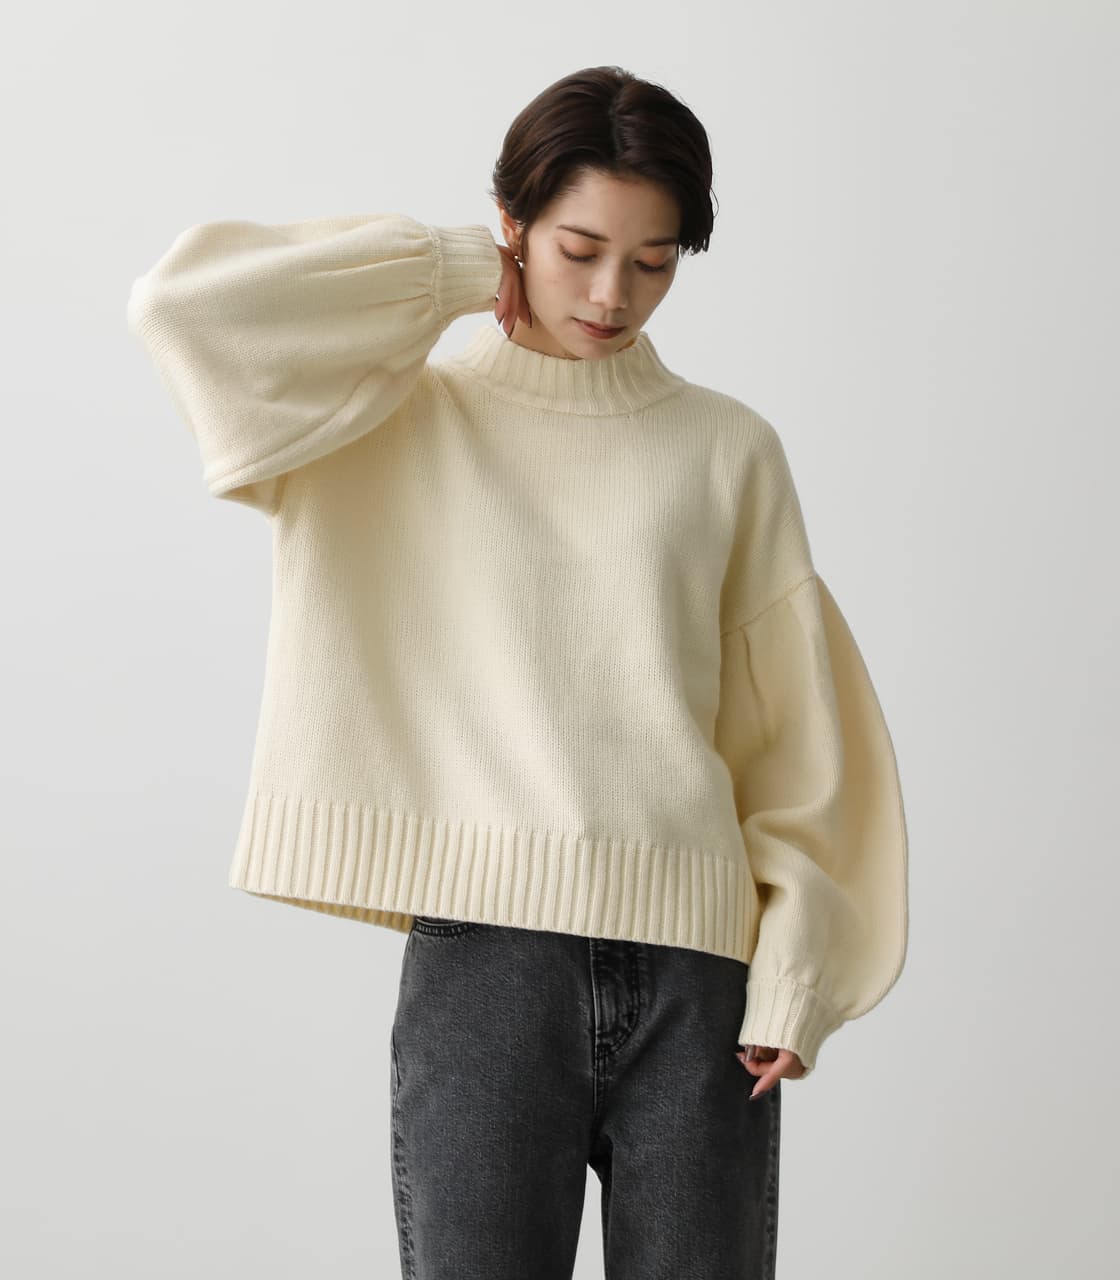 AZUL BY MOUSSY | ROUND VOLUME SLEEVE KNIT TOPS (ニット ) |SHEL ...